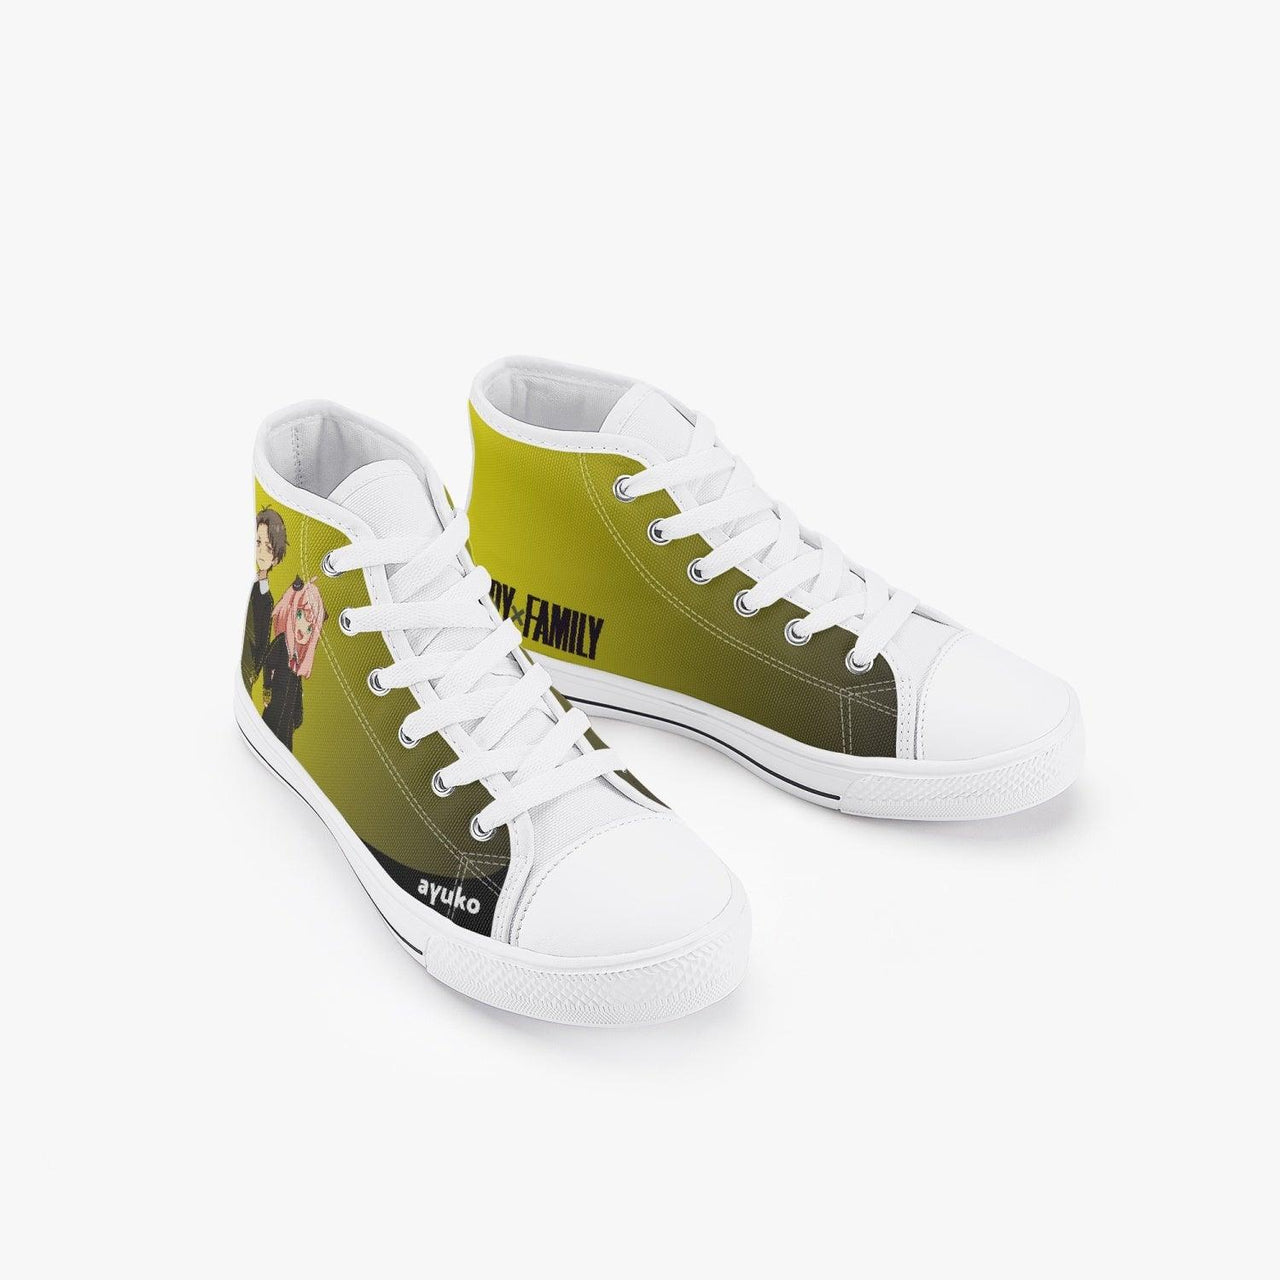 Psy x Family Anya Forger Kids A-Star High Anime Shoes _ Psy x Family _ Ayuko